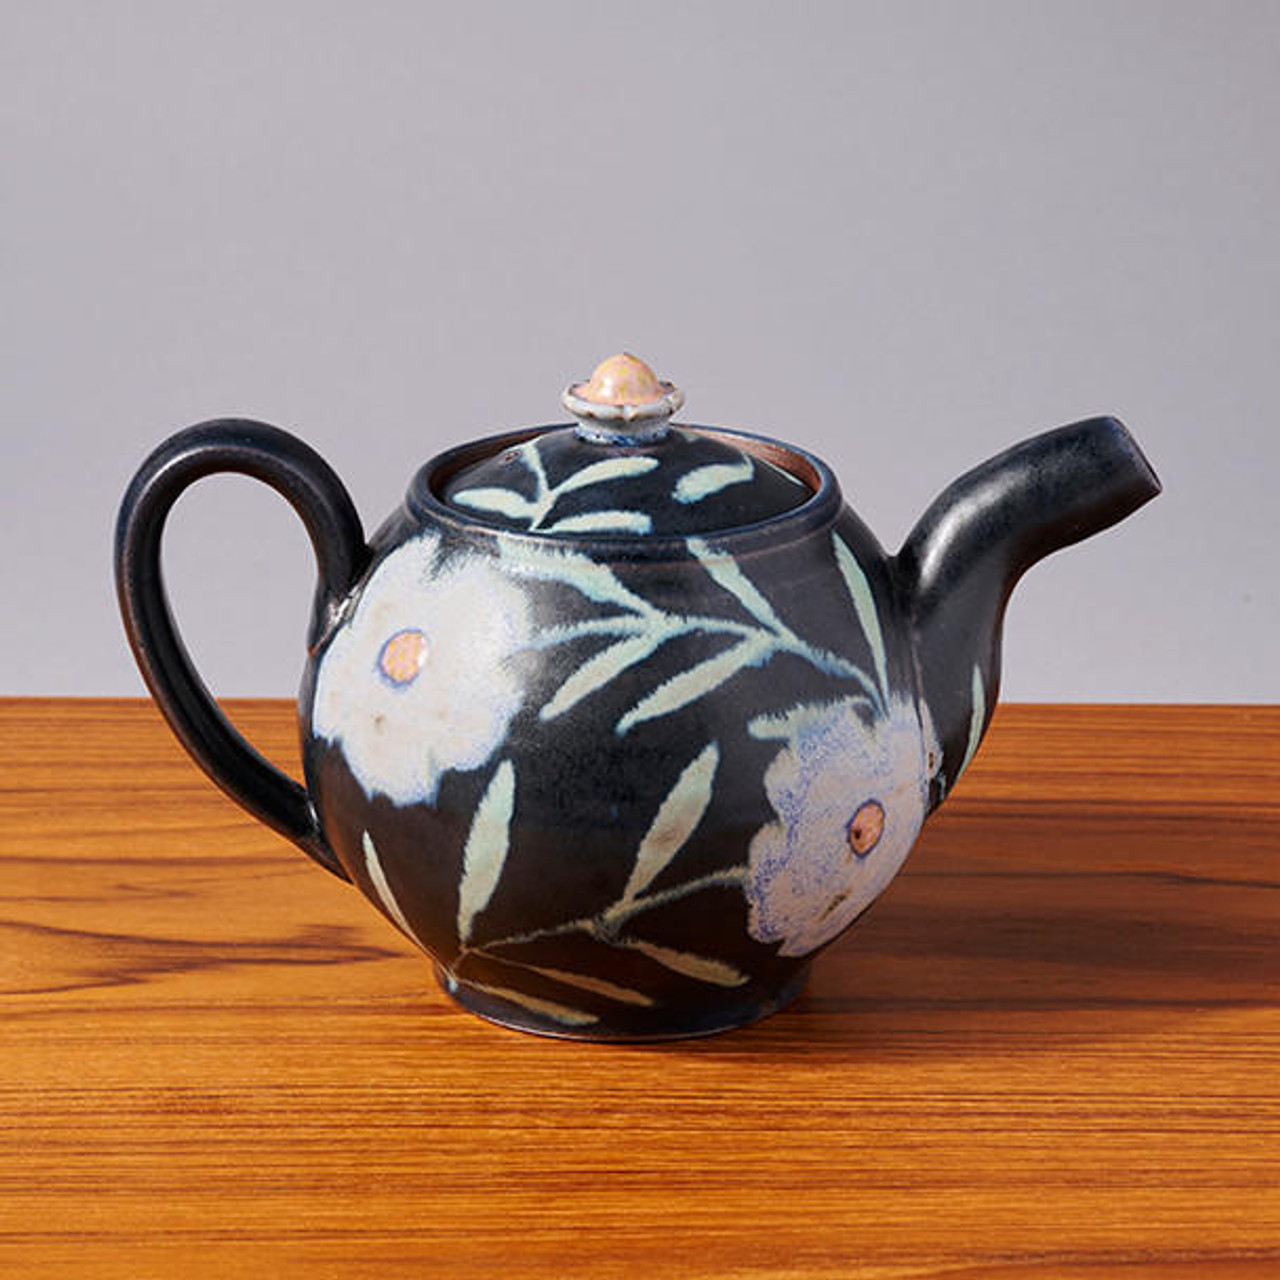 https://cdn11.bigcommerce.com/s-3rl2qg0z2p/images/stencil/1280x1280/products/12532/26812/ruth-easterbrook-floral-teapot-by-ruth-easterbrook__19458.1662242021.jpg?c=1?imbypass=on